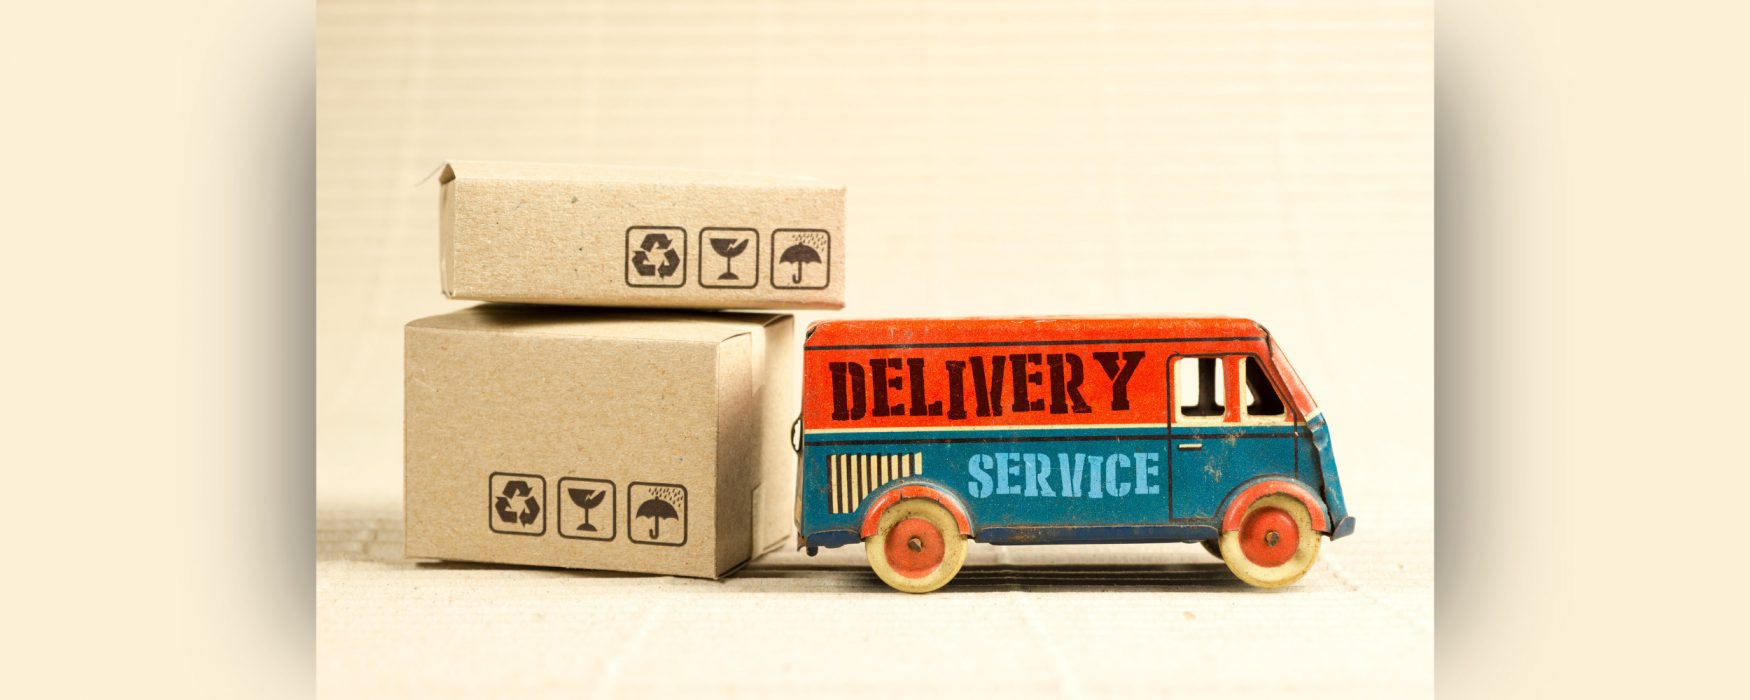 Image of a toy delivery truck sitting with two packages